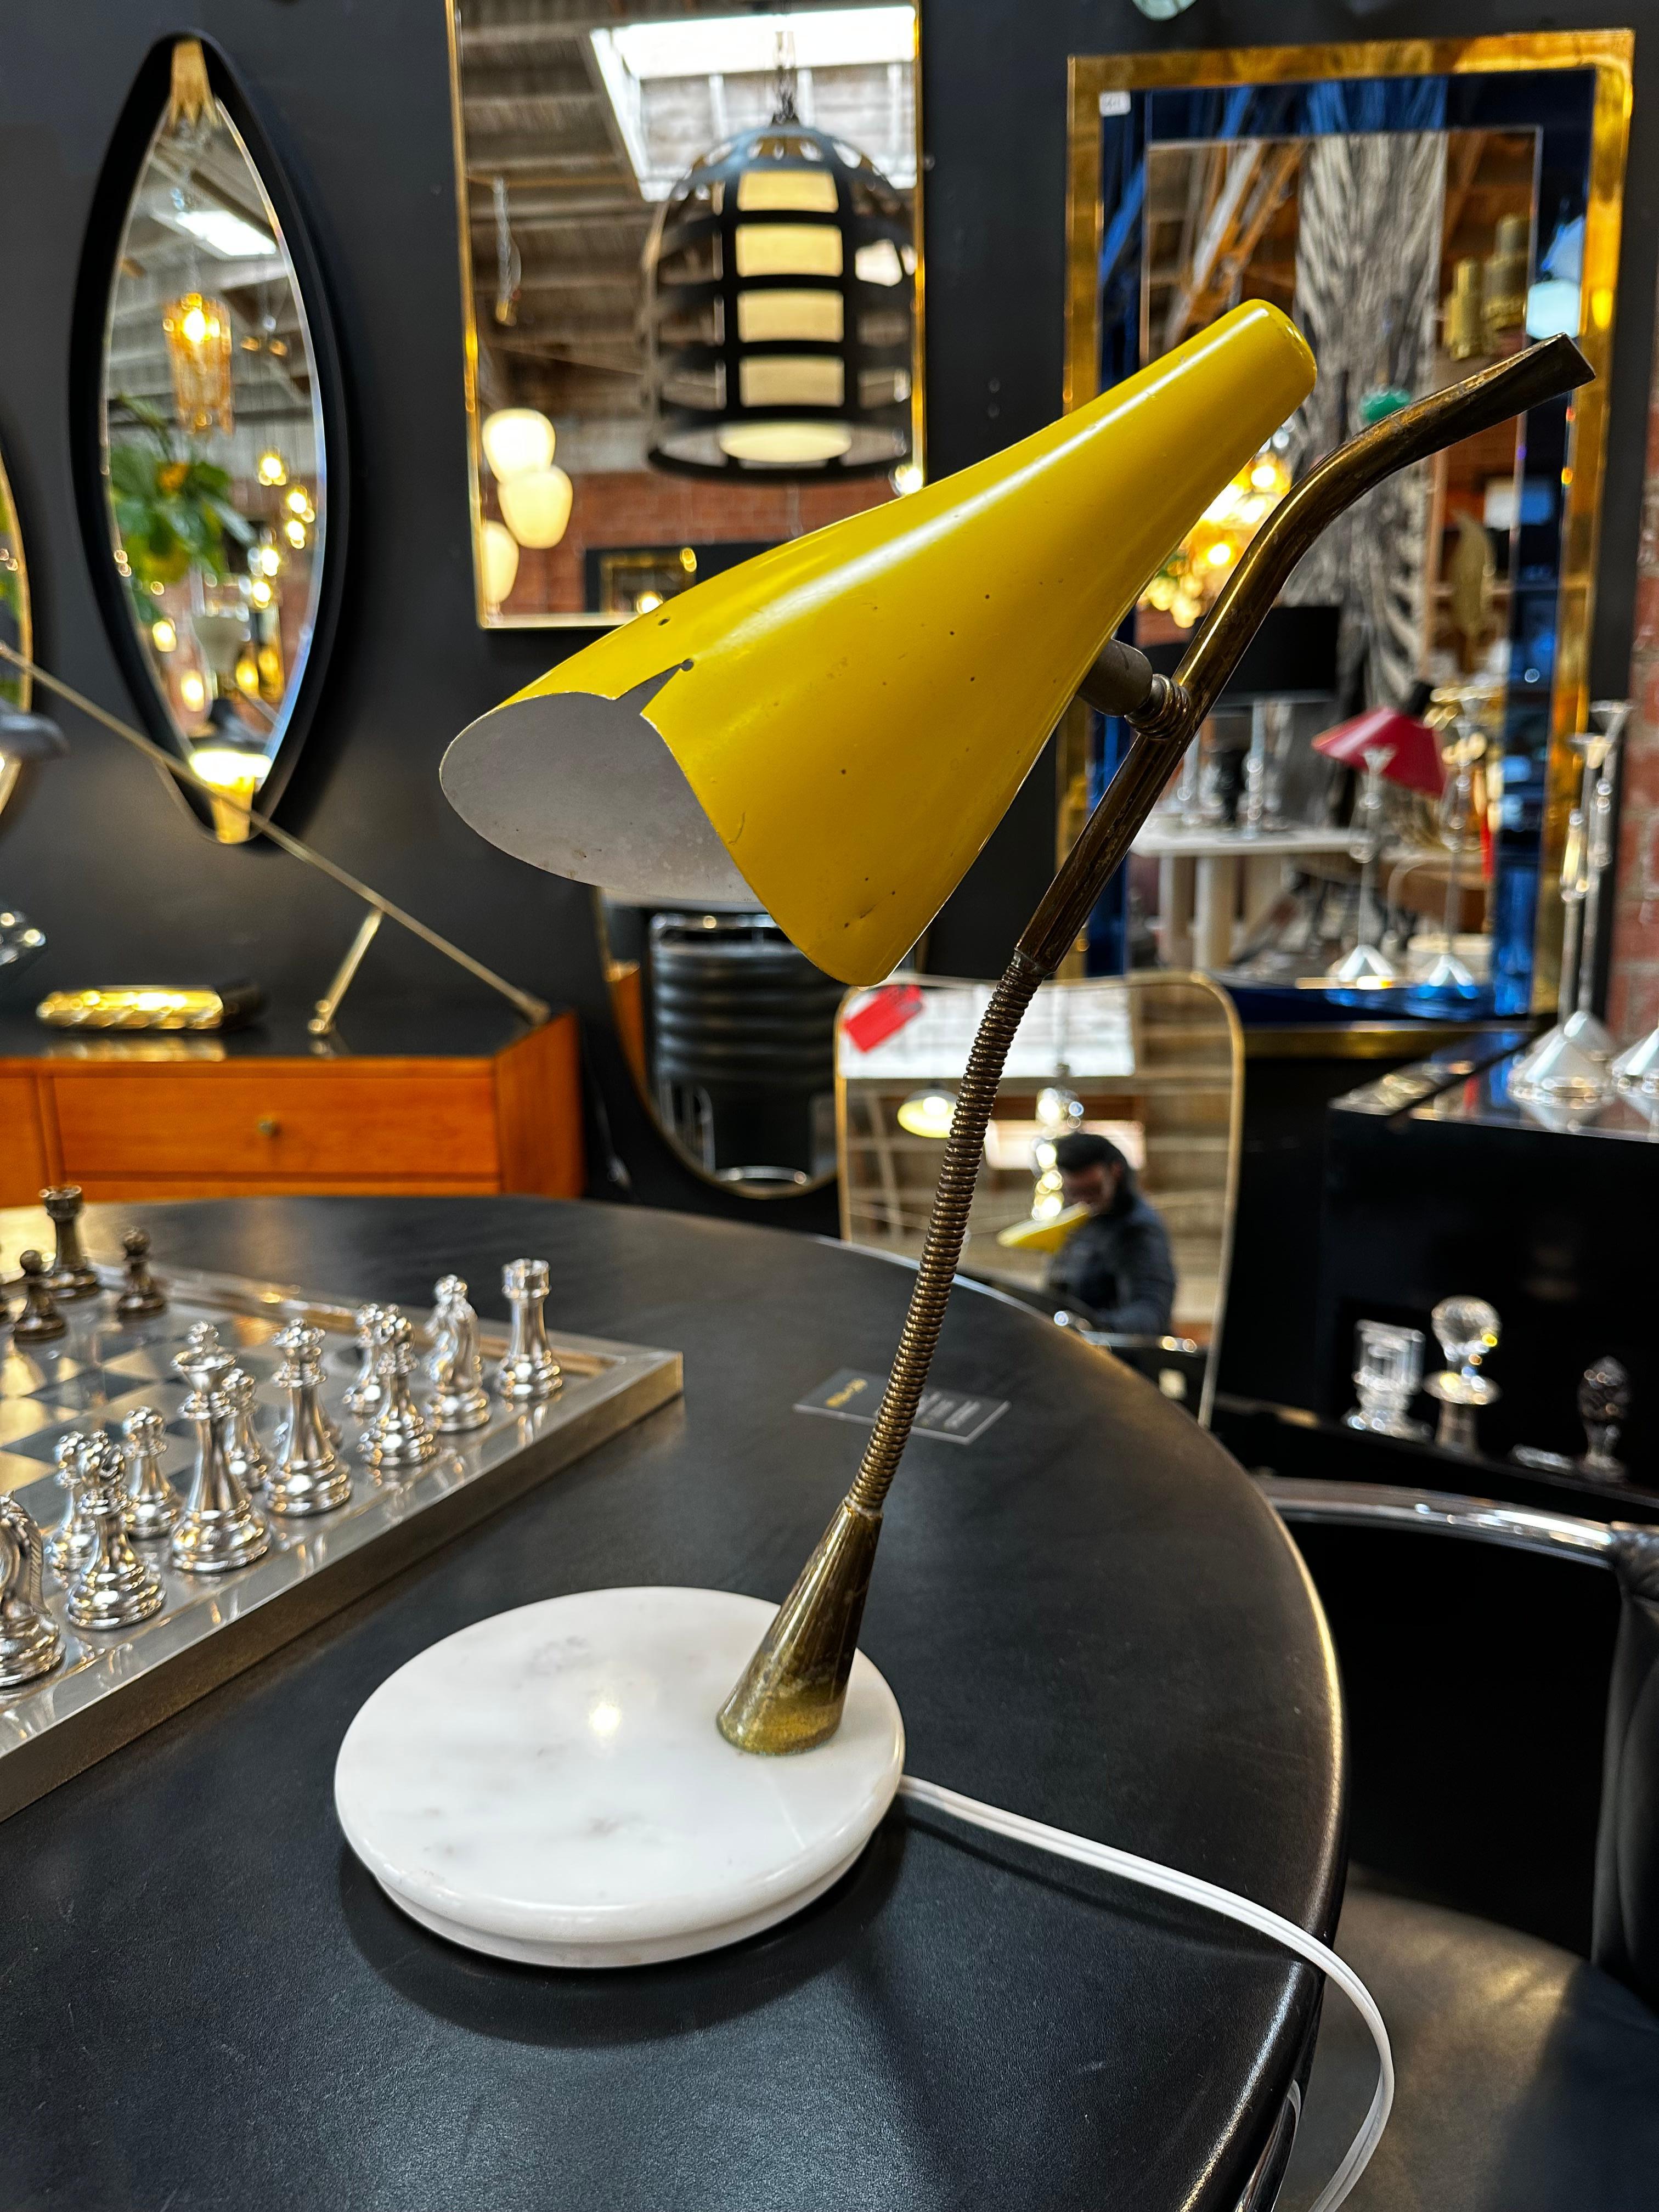 A table lamp designed by Italian designer Oscar Torlasco. Yellow enameled metal, brass frame and marble base. Adjustable shade.